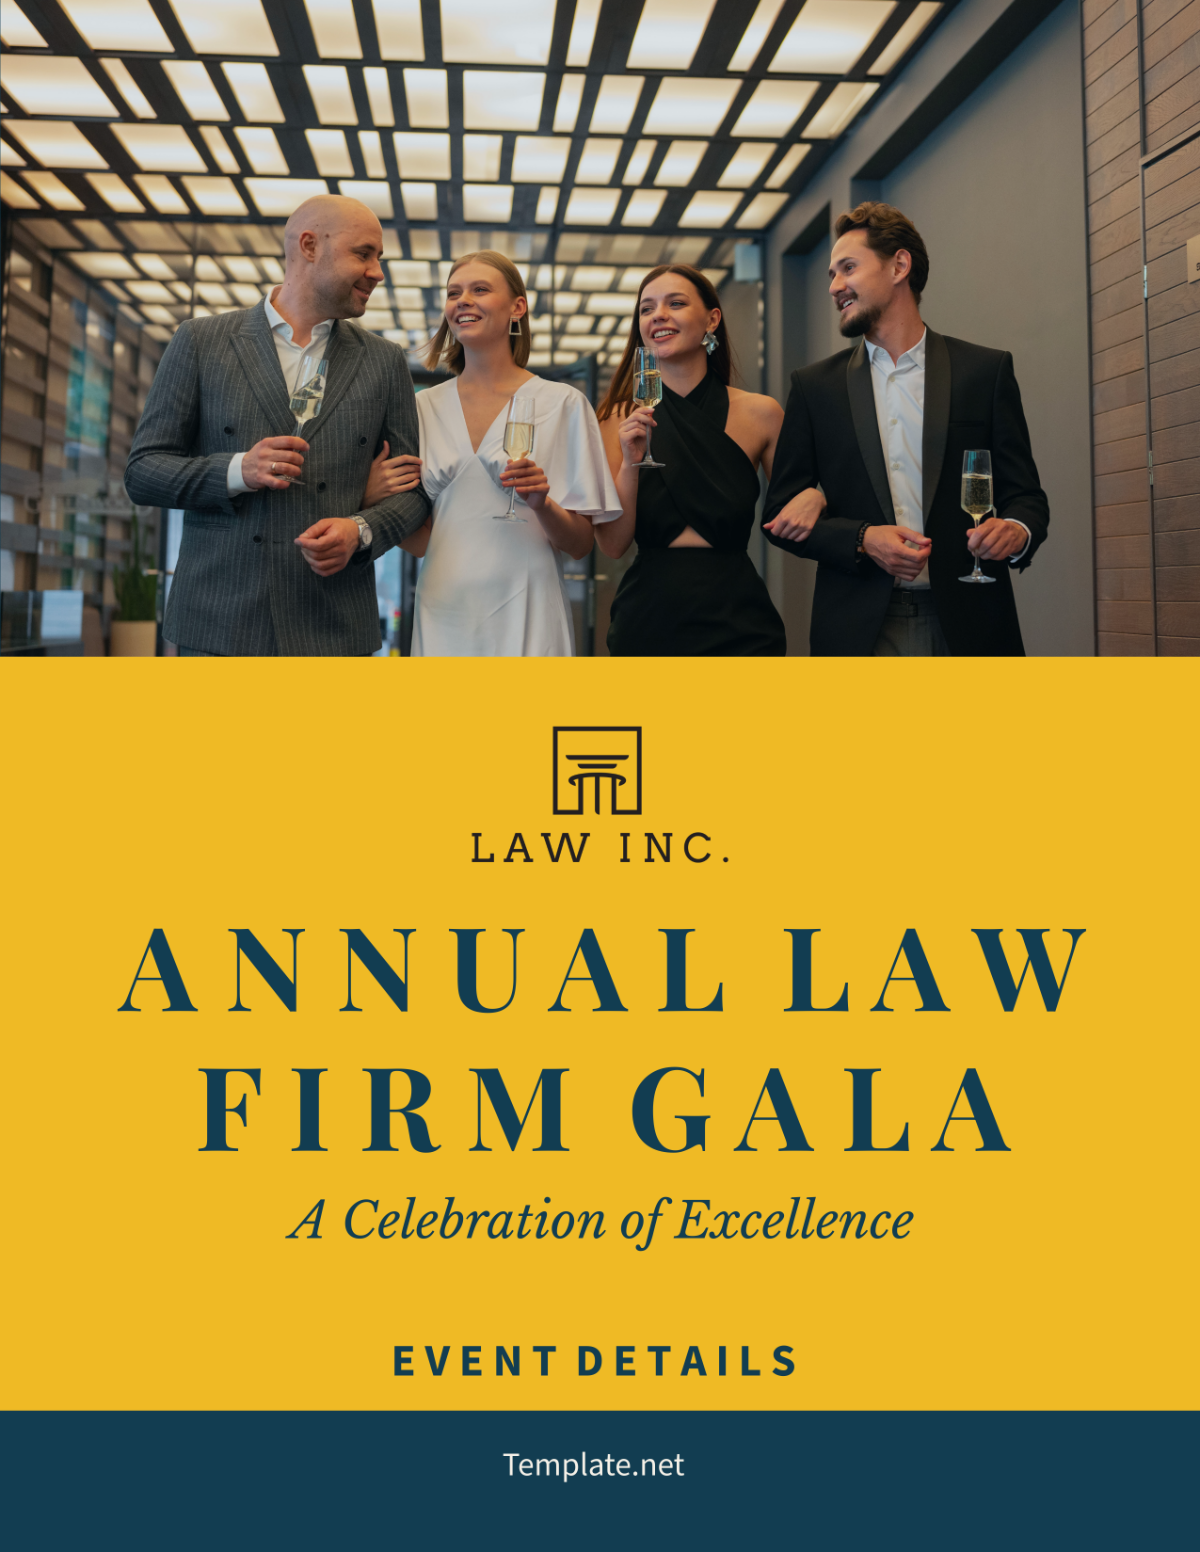 Law Firm Event Flyer